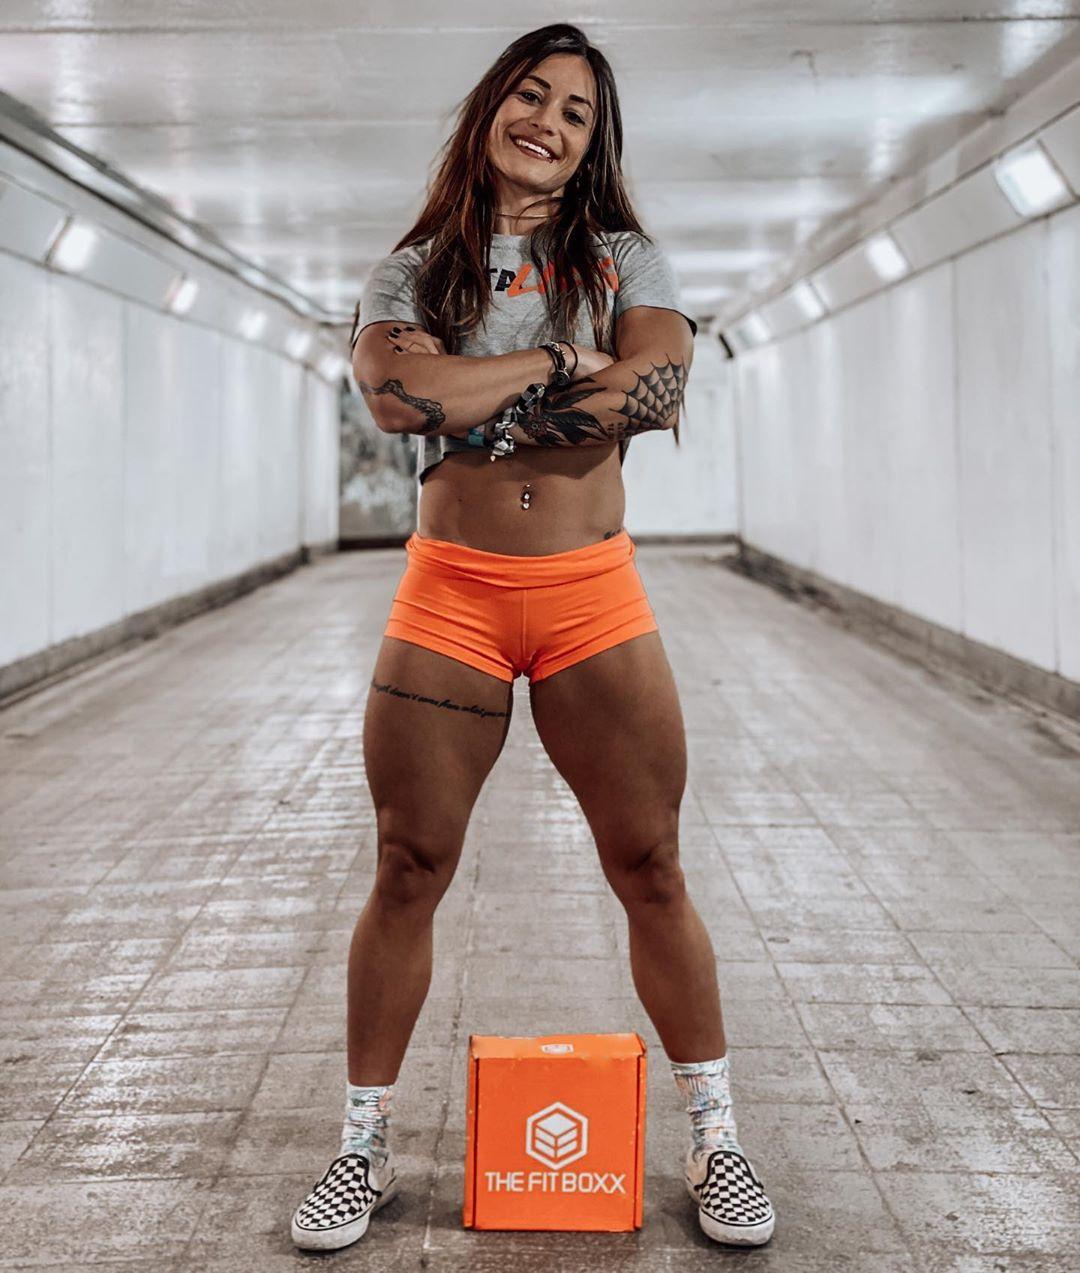 51 Hot Pictures Of Celia Gabbiani Which Make Certain To Grab Your Eye 202